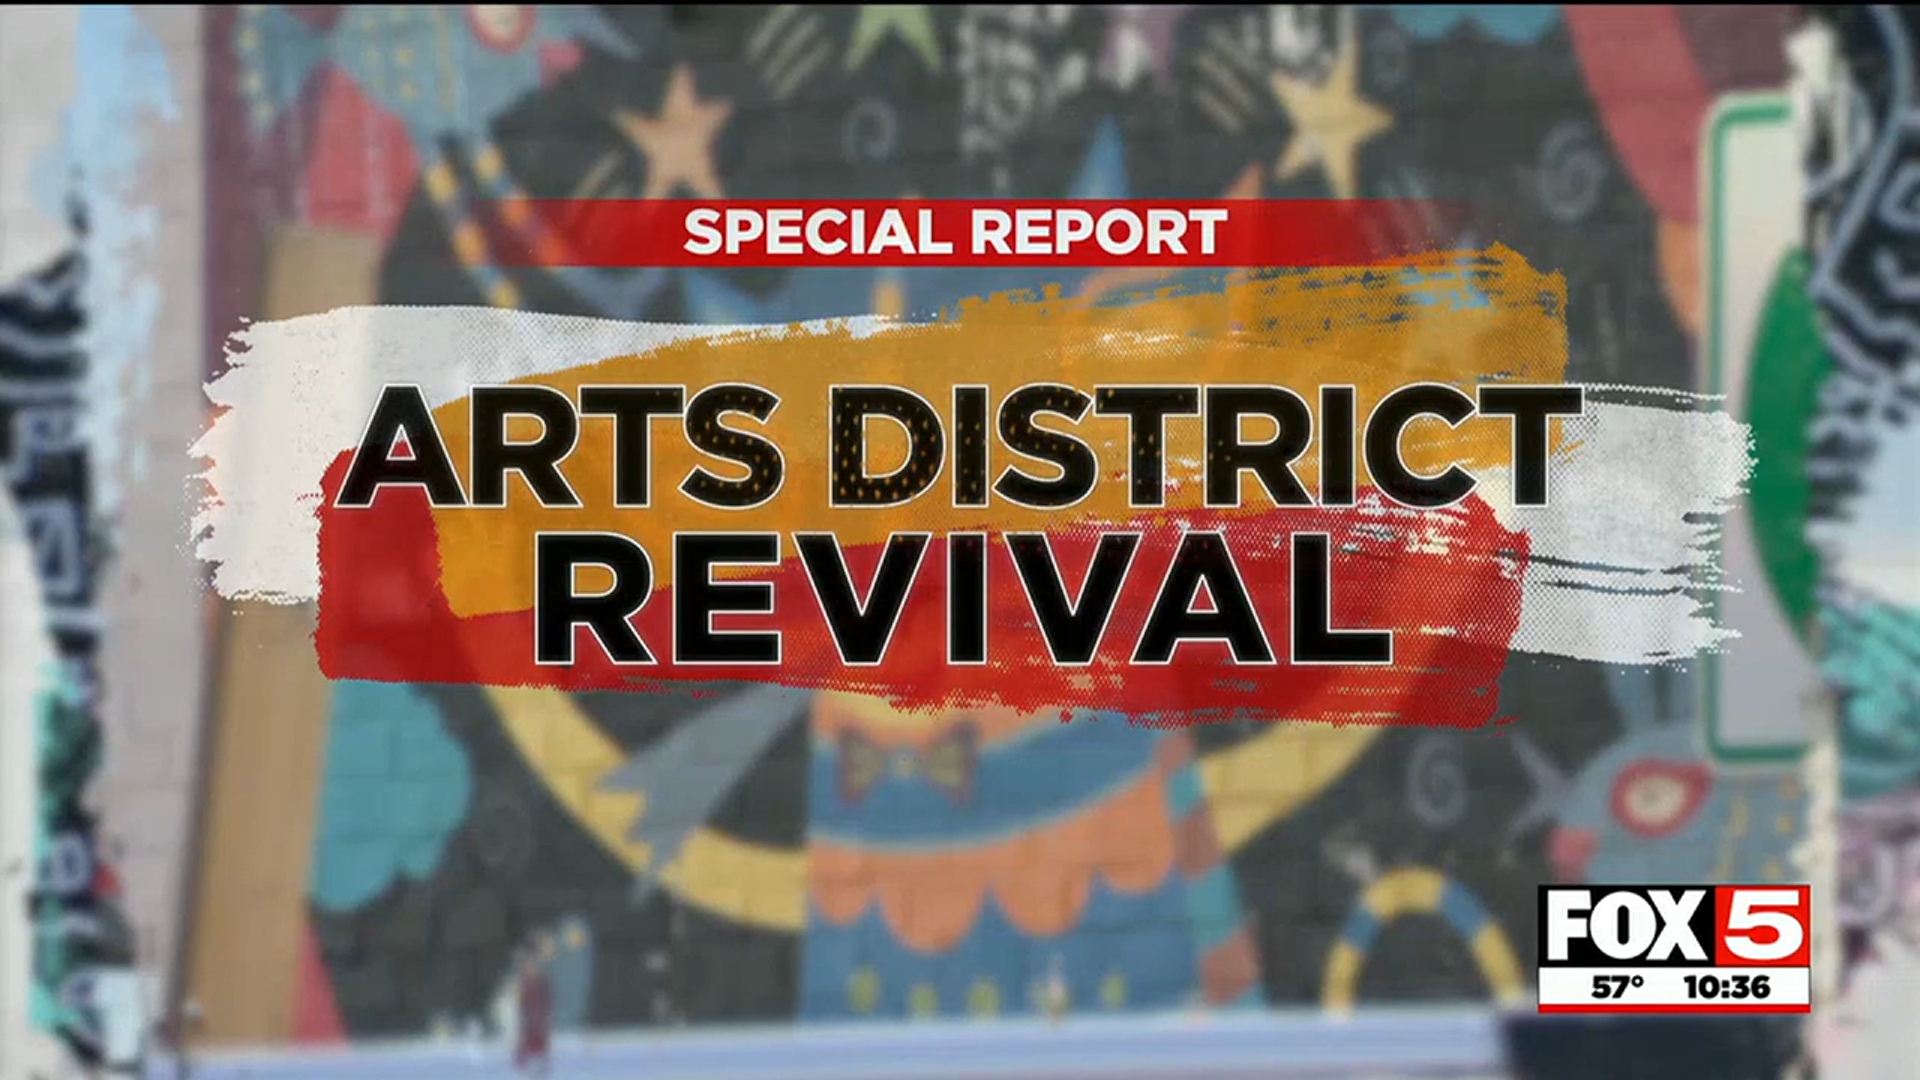 Las Vegans know the Arts District as the place that hosts First Friday and unique locally-owned shops and restaurants. Some might also remember a time, less than a decade ago, when the area did not seem up for that kind of development ... Diaz described the changes she’s seen in her district.